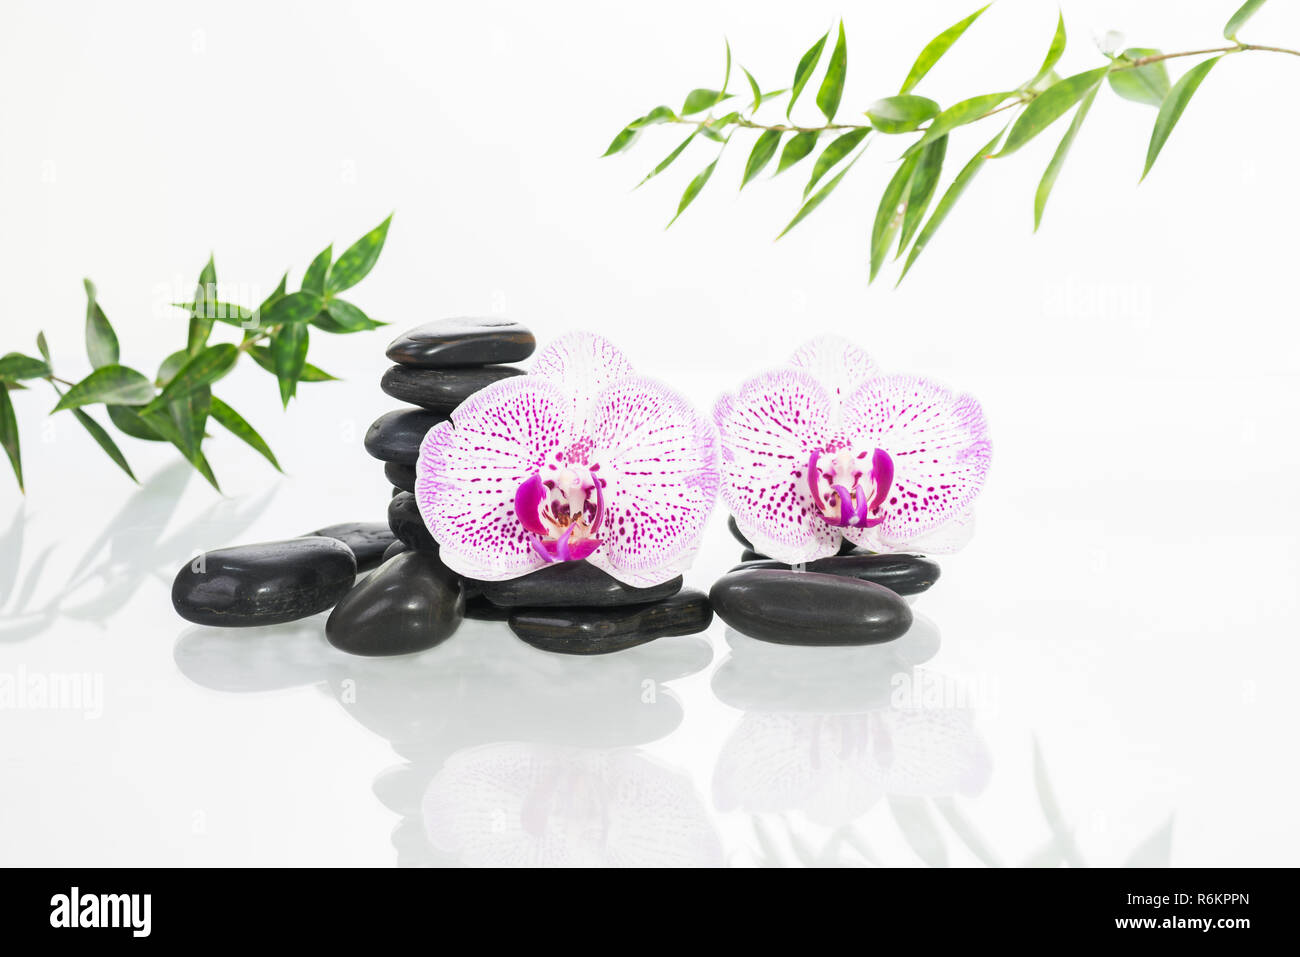 Spa concept with Phalaenopsis orchids, hot stones and bamboo leaves close up Stock Photo